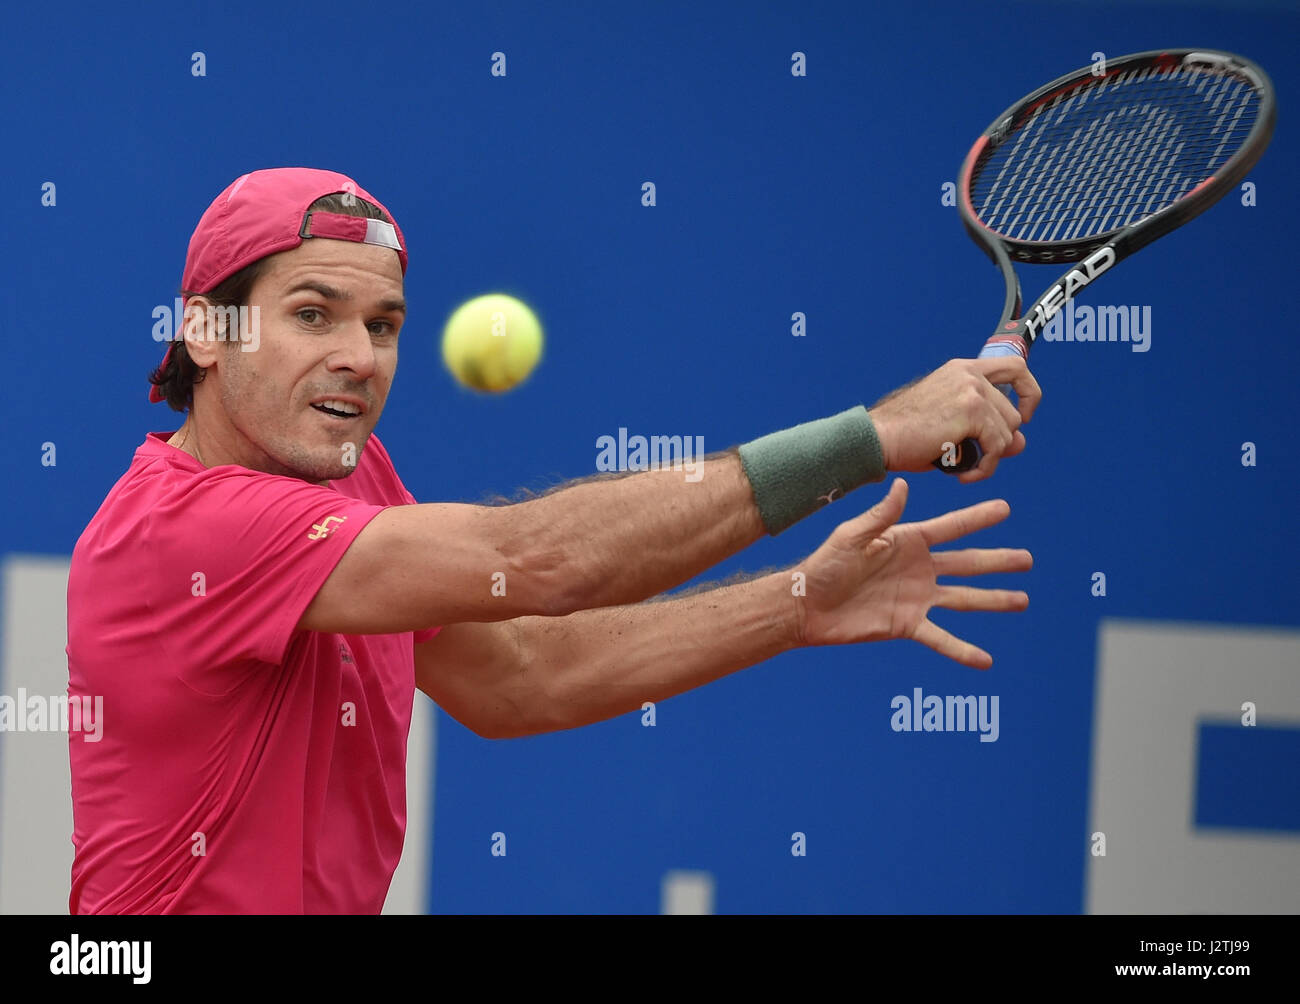 Munich, Germany. 01st May, 2017. German tennis player Tommy Haas plays  against Ukraine's Sergiy Stakhovsky in the men's singles first round match  at the ATP tour in Munich, Germany, 01 May 2017.